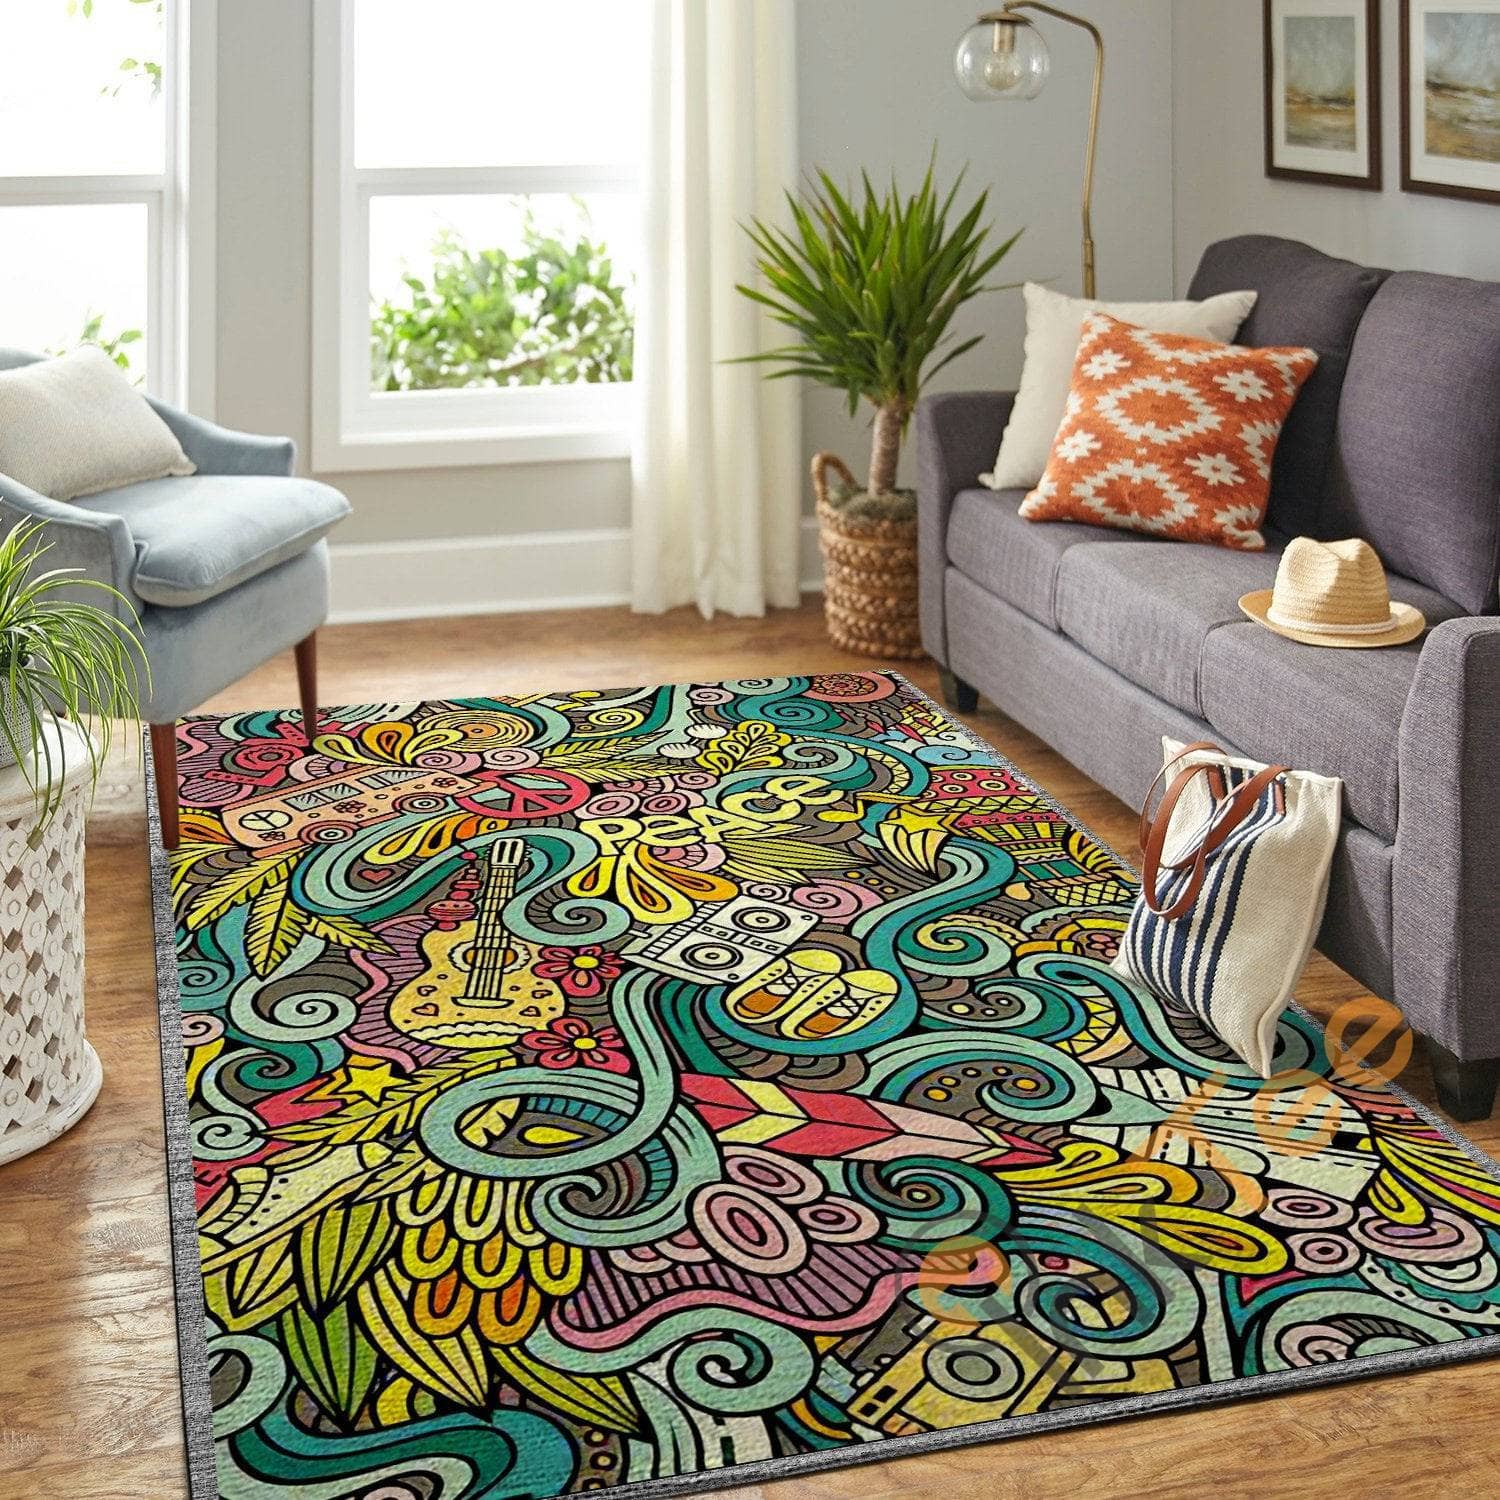 Peace Messy But Gorgeous Pattern Hippie Soft Livingroom Carpet Highlight For Home Beautiful Rug